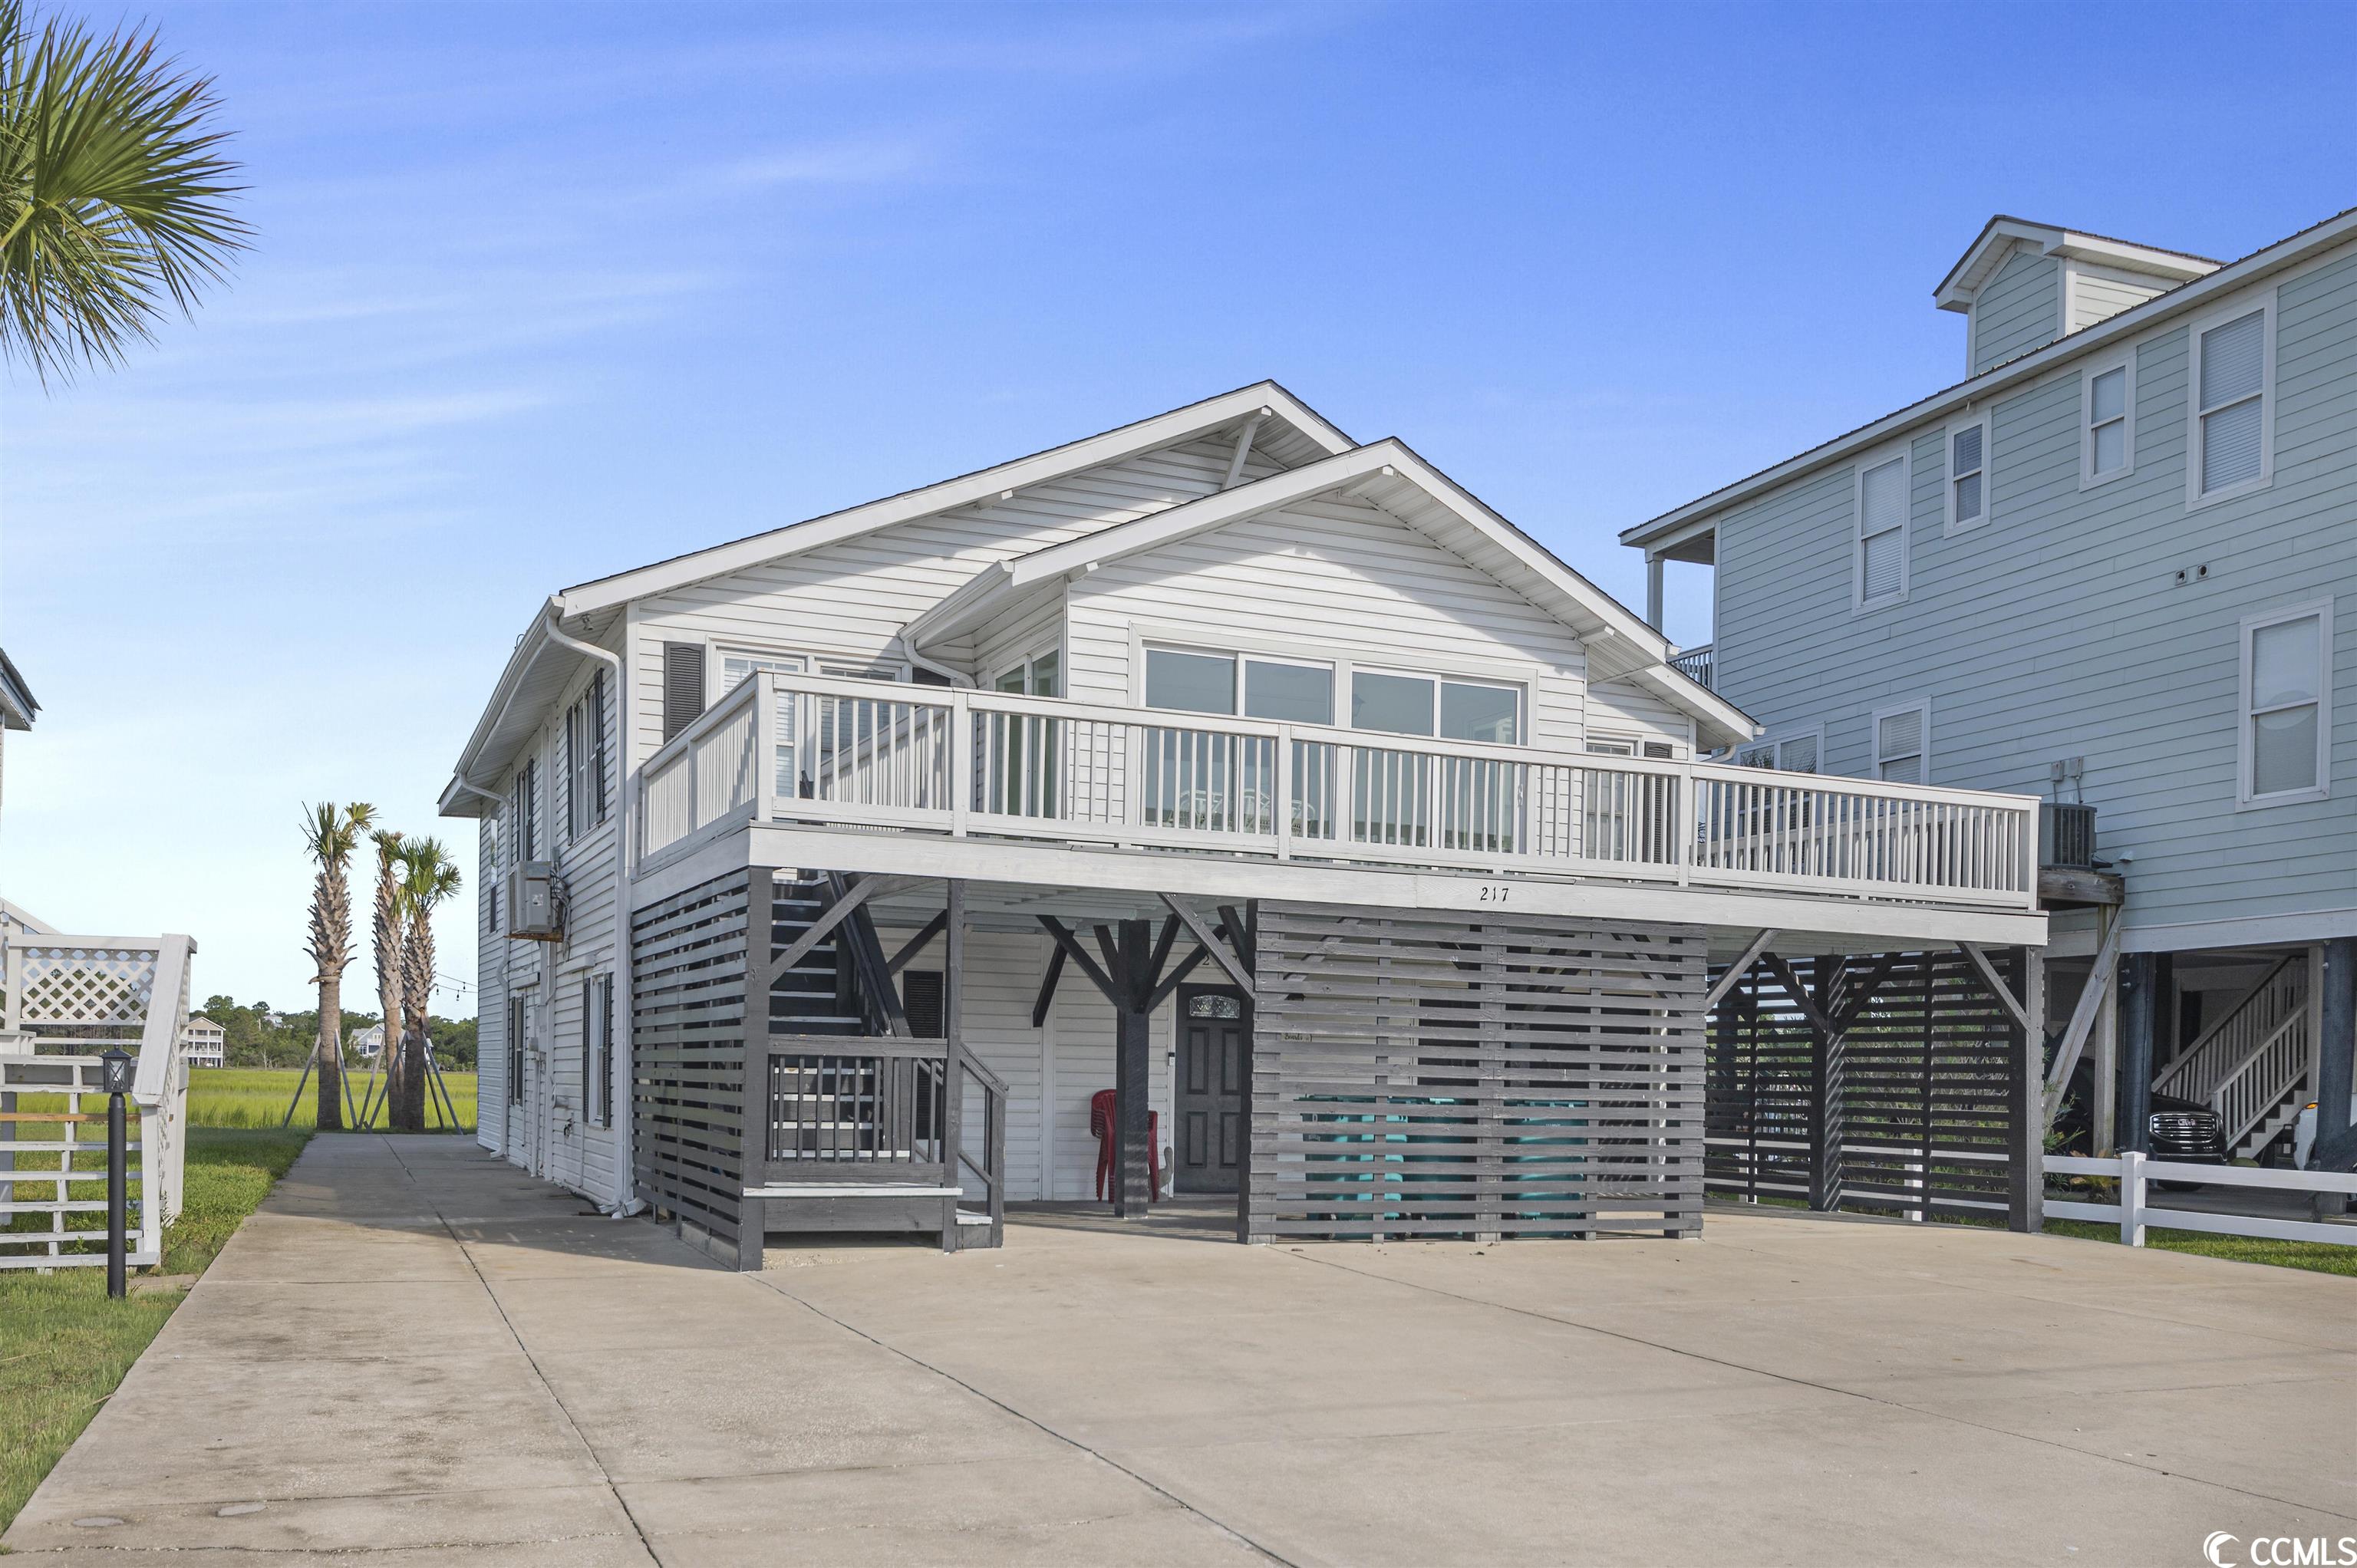 this 5 bedroom, 4 bathroom home is ideally located directly on the marsh and only one block from the beach! bring all of your family and friends to enjoy creekfront living in this home that comfortably sleeps 16. everyone can access the home with ease, with your very own elevator and enough boat, rv, car, and motorcycle parking for 8+ vehicles! enjoy sunrises from the spacious front porch or sunroom and beautiful sunsets over the marsh on the back porch or from the carolina room off the kitchen. go kayaking, paddleboarding, or fish off your fishing dock right in your own backyard. just a short drive to all of the golf the area has to offer, five minutes to murrells inlet marshwalk with waterfront dining and events, and a five minute walk to the garden city pier. this popular vacation rental also has over 25+ five star reviews and is the perfect turn-key investment or tranquil place to call home. home will convey fully furnished.